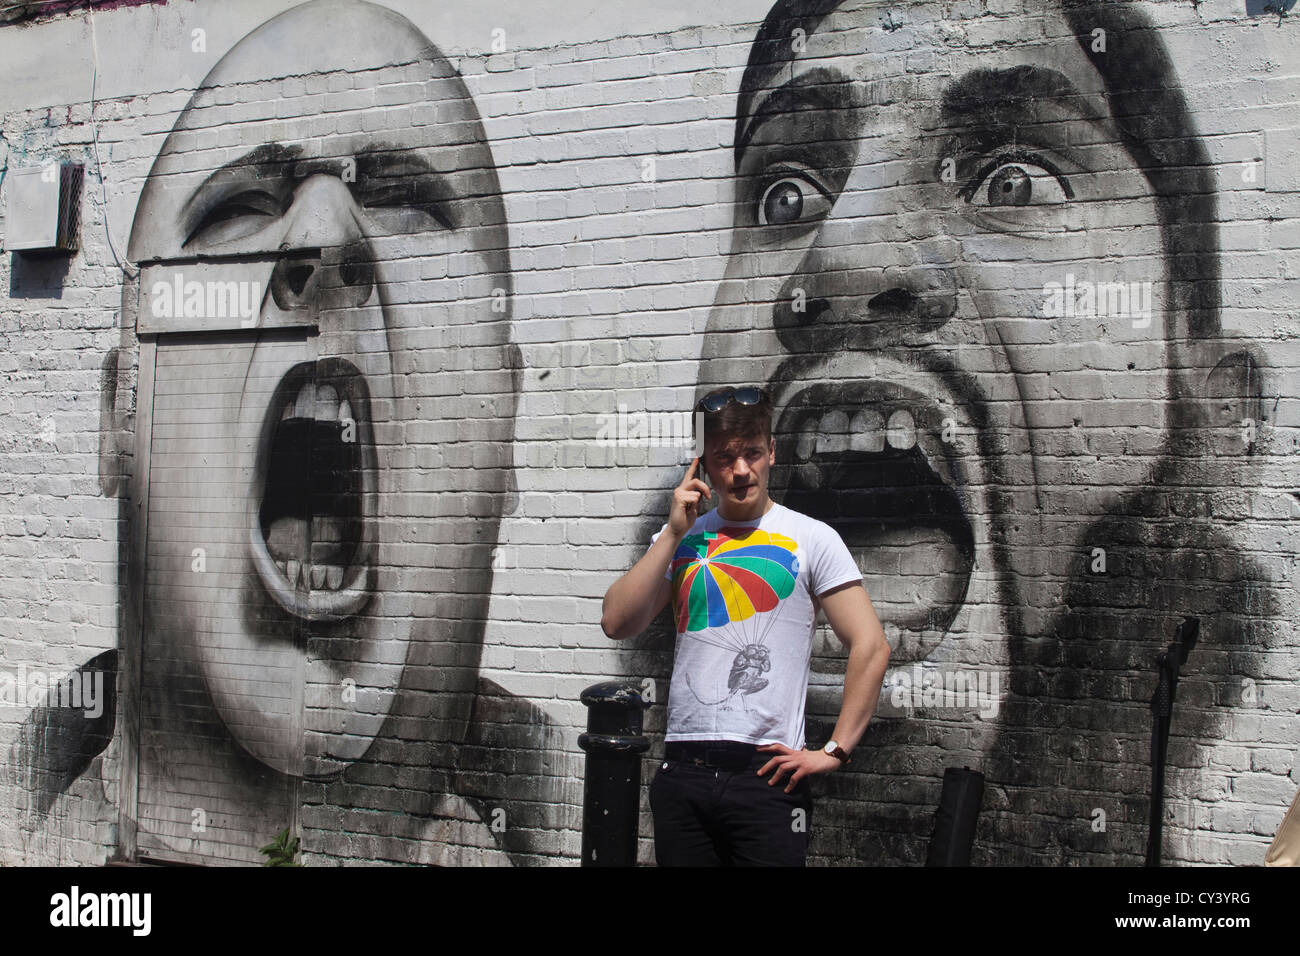 A fashionably dressed young man makes a call on his mobile telephone beneath a piece of graffiti depicting extremists Stock Photo